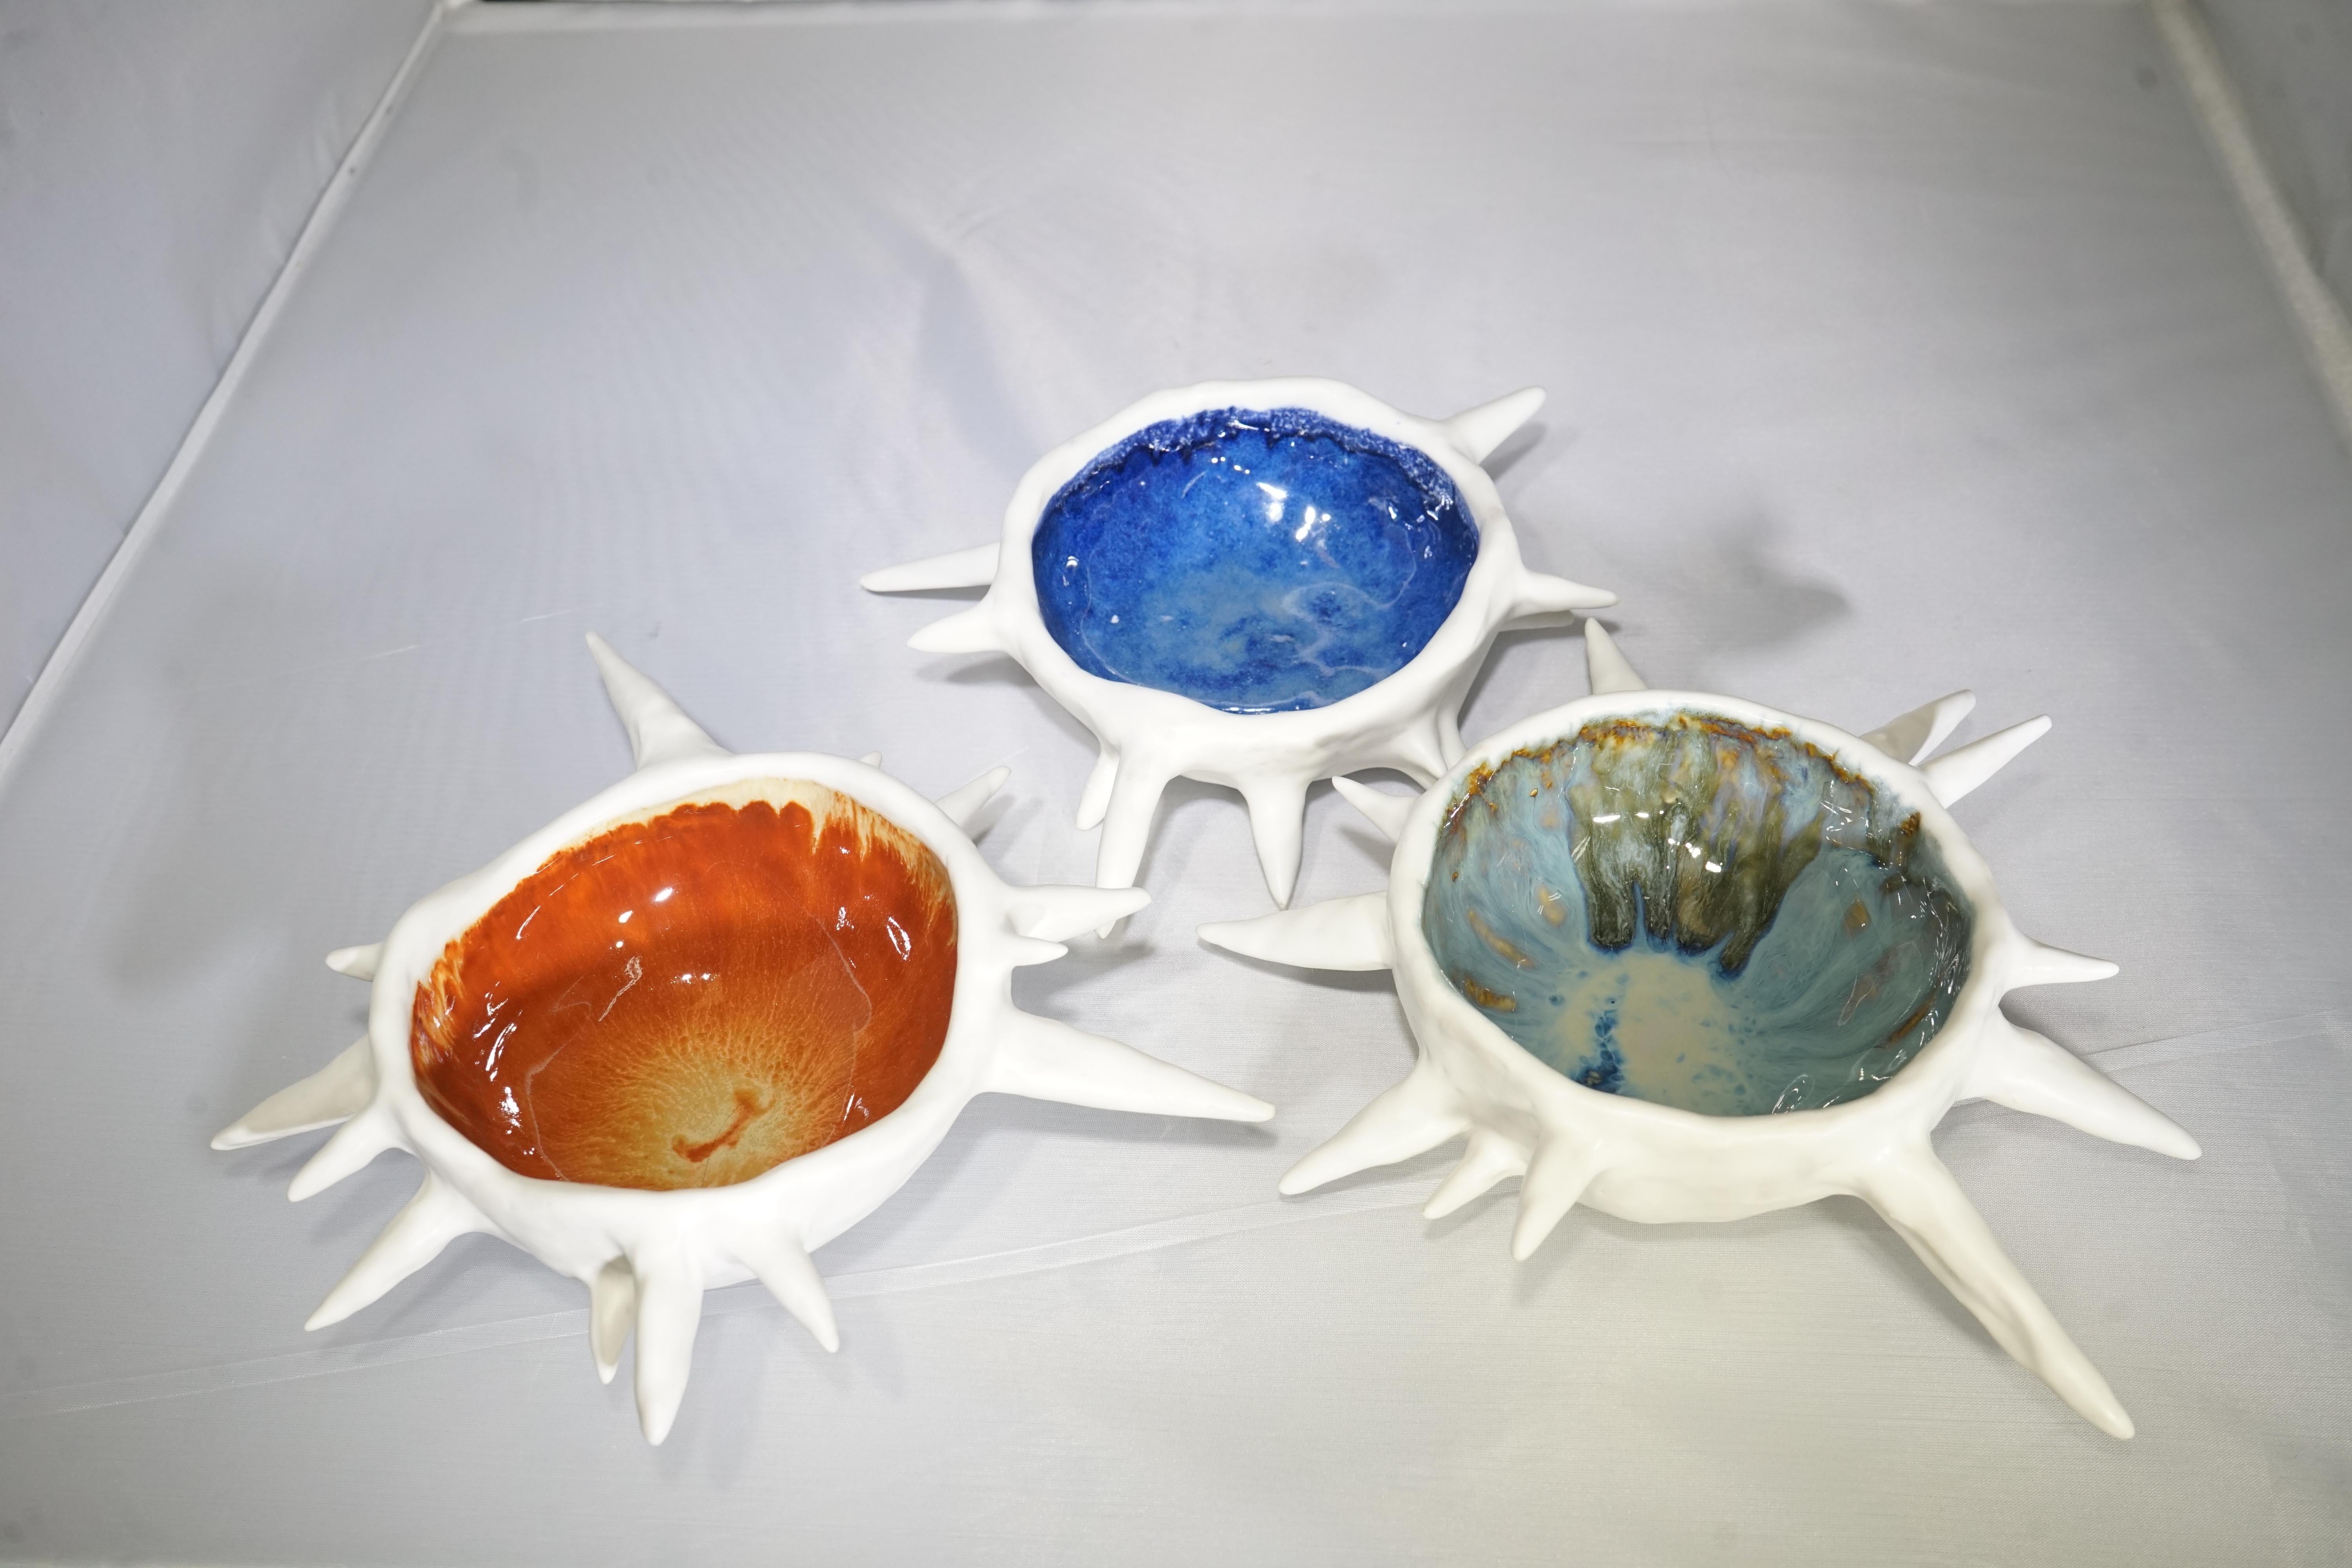 Contemporary Isabelle Poupinel Paris sea urchin shaped bowl featuring multi-color porcelain enamels. Vintage-looking urchins. The marina blue, terracotta orange, glittery pinky-yellow enamels are evocative of the Italian Riviera of the 1930s. These